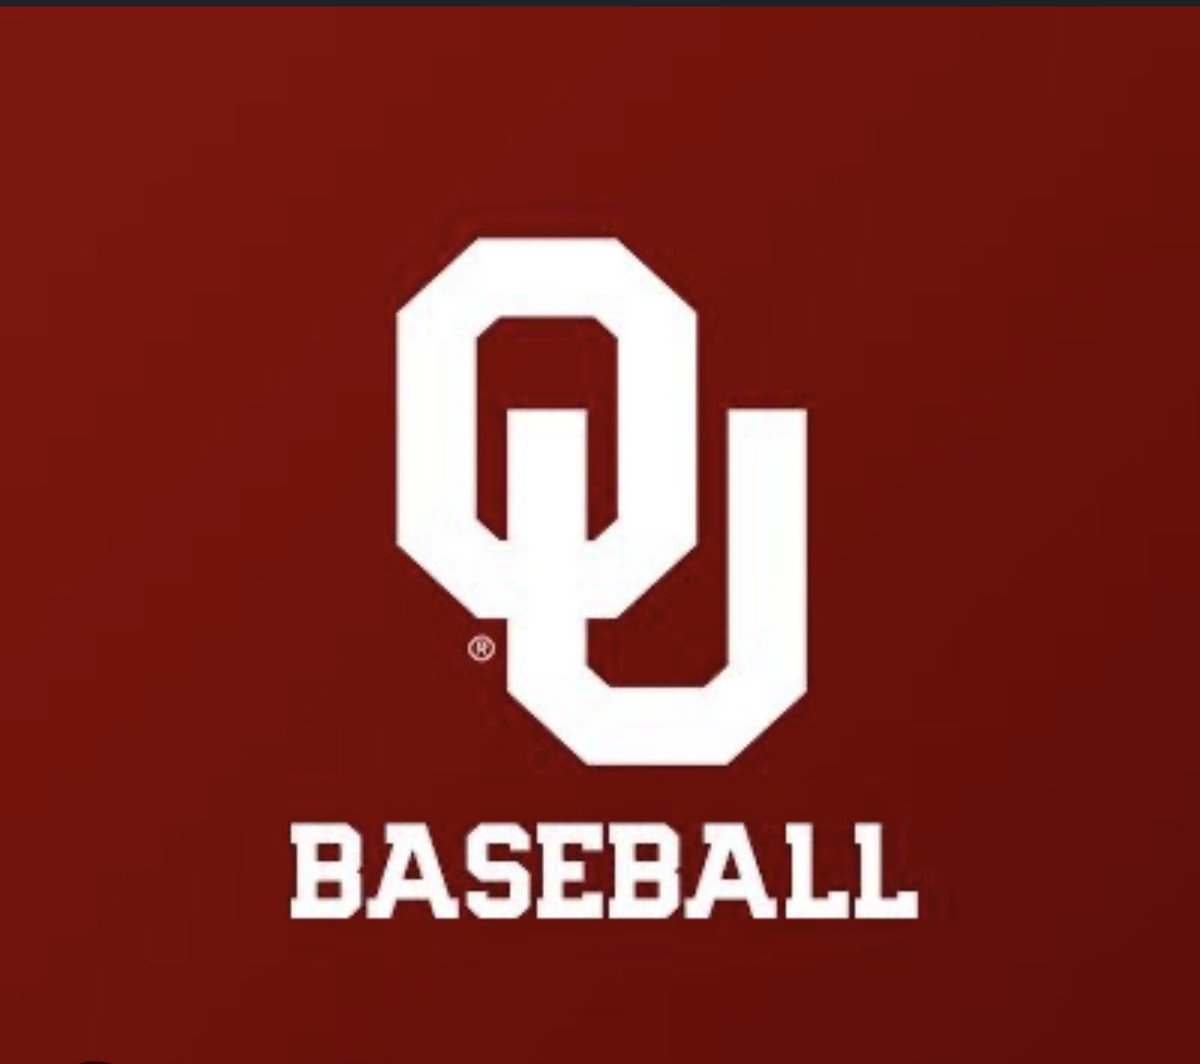 Beyond blessed to announce my commitment to the University of Oklahoma . I want to thank God and everyone who has supported me along the way.Boomer Sooner. @GraysonBaseball @CalHernandez1 @ConnorFlanaga11 @CoachToddButler